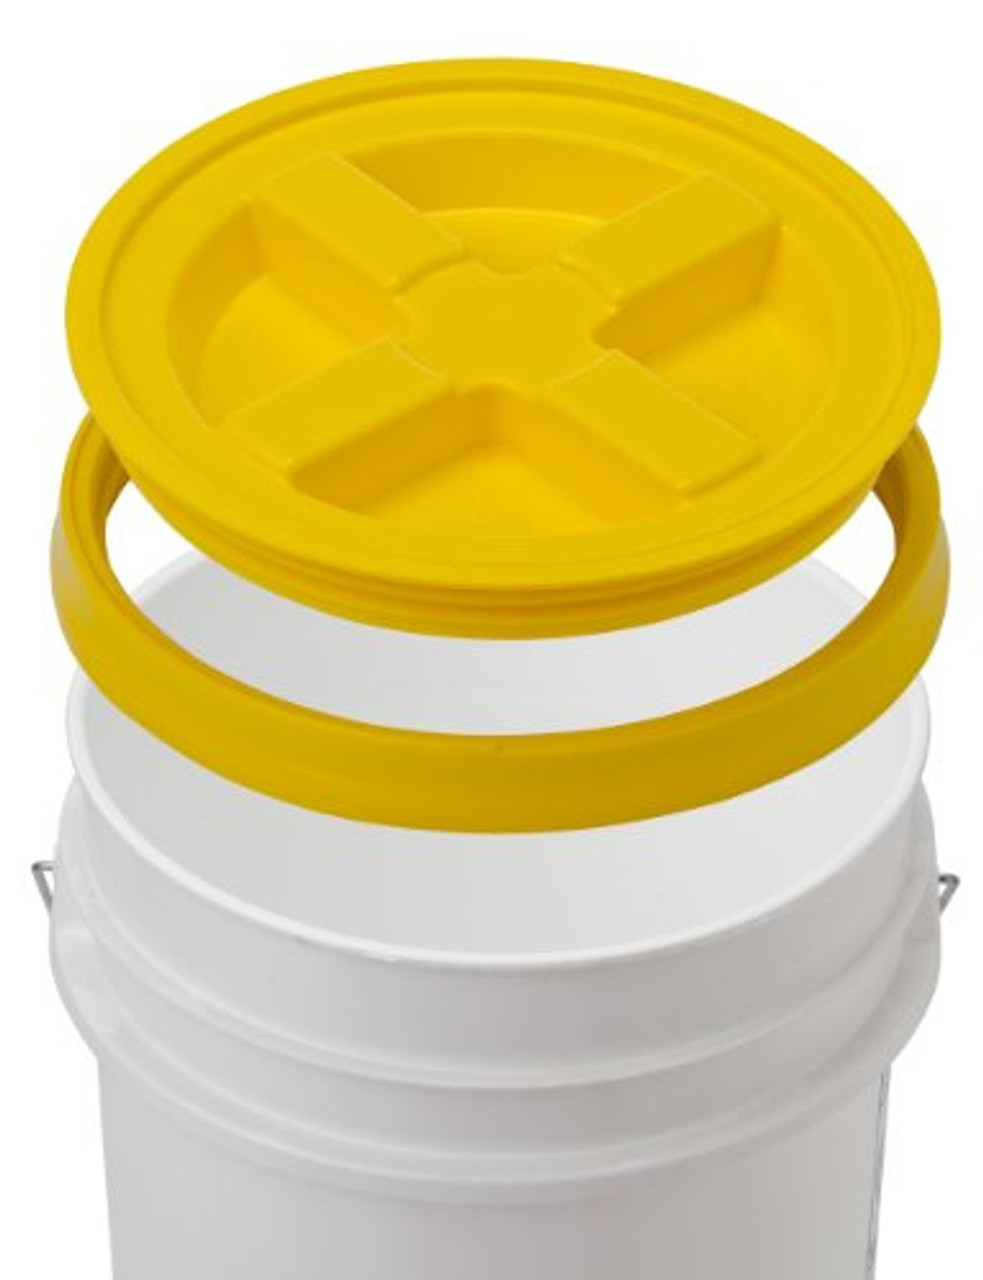 Bucket Kit Five Colored 5 Gallon Buckets with Matching Gamma Seal Lids (One Each Blue Red Yellow White Black)